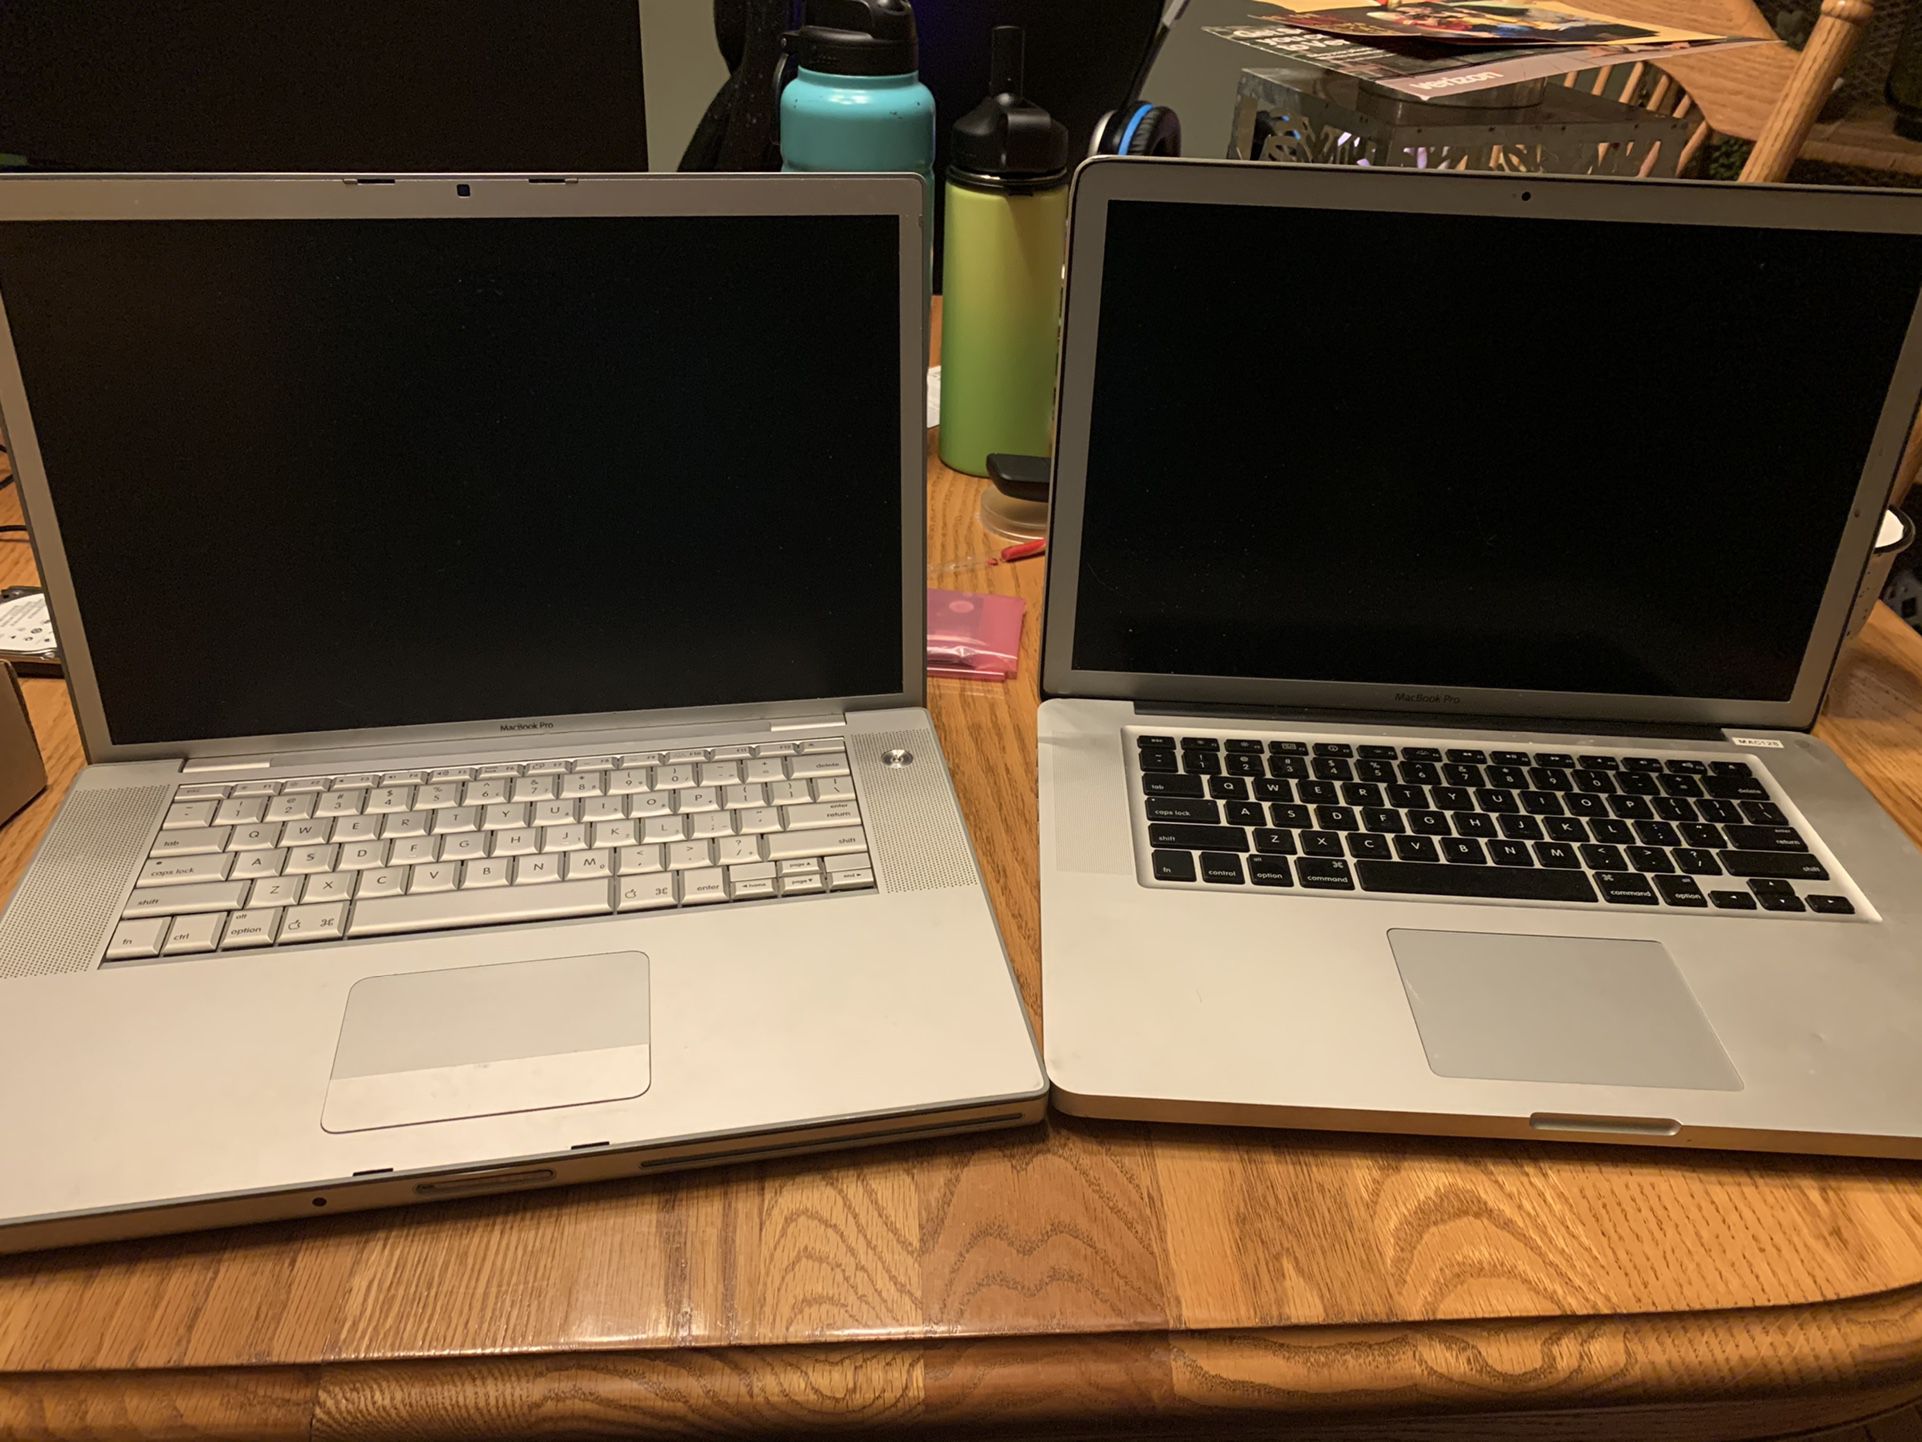 MacBook Pro computers *FOR PARTS*